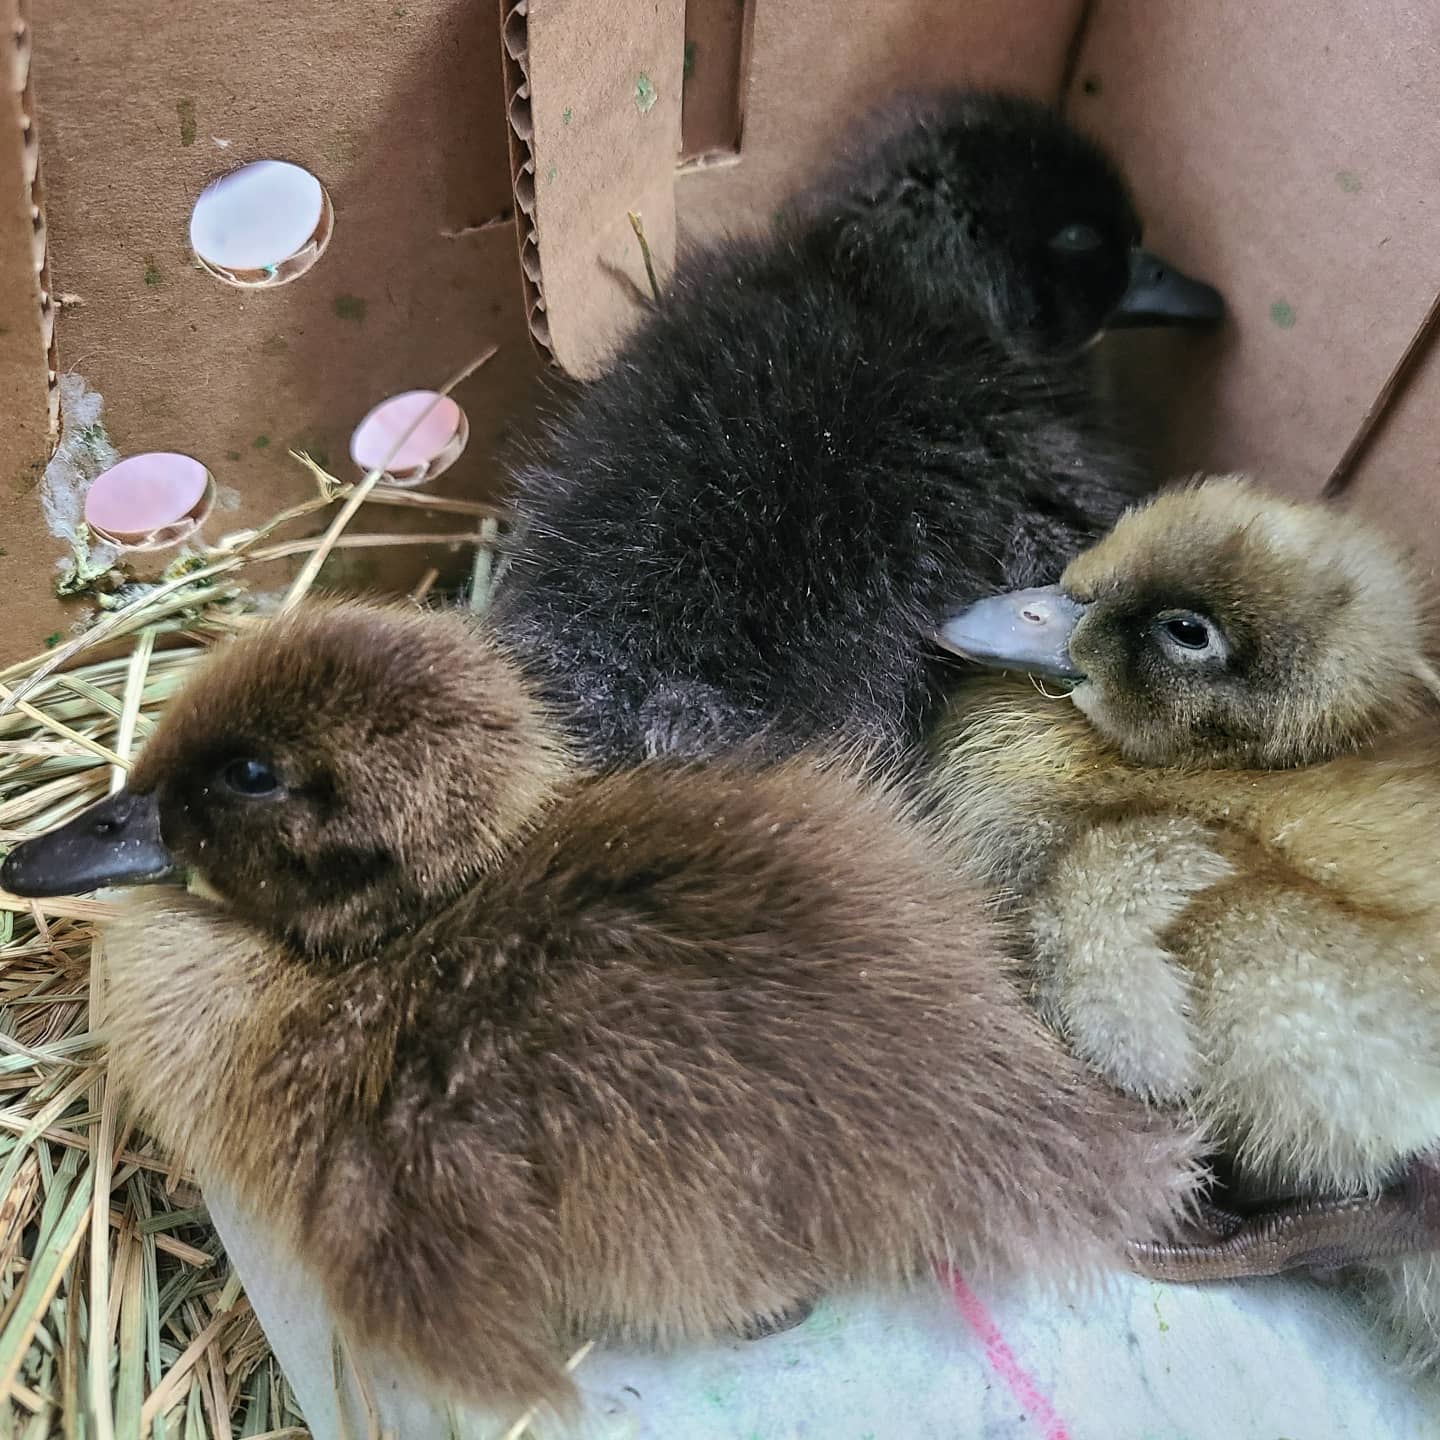 3 ducklings cuddled together on a heating pad in a cardboard box